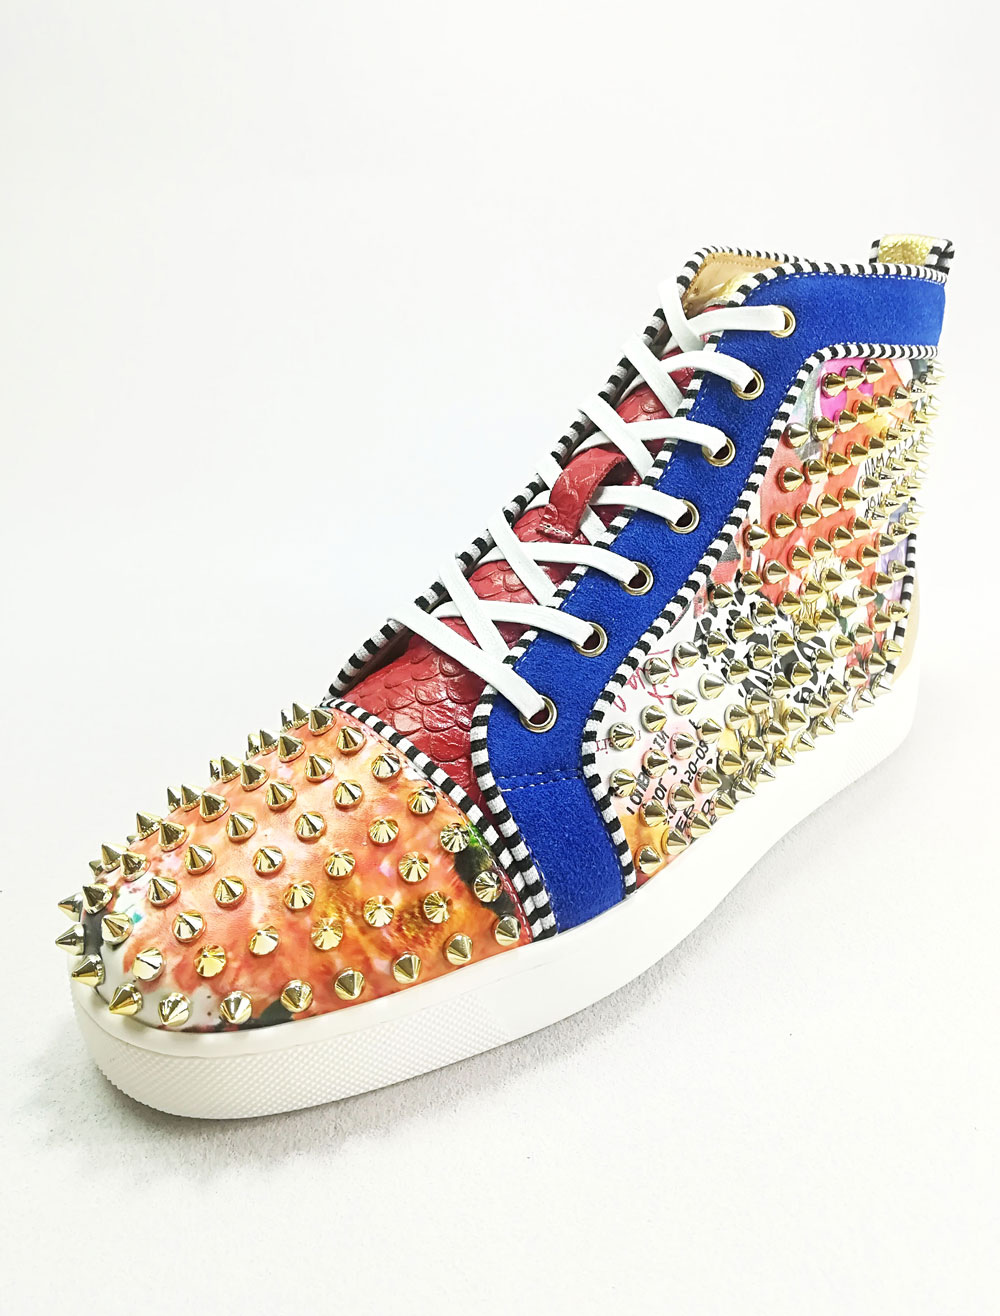 Buy > blue spike shoes > in stock